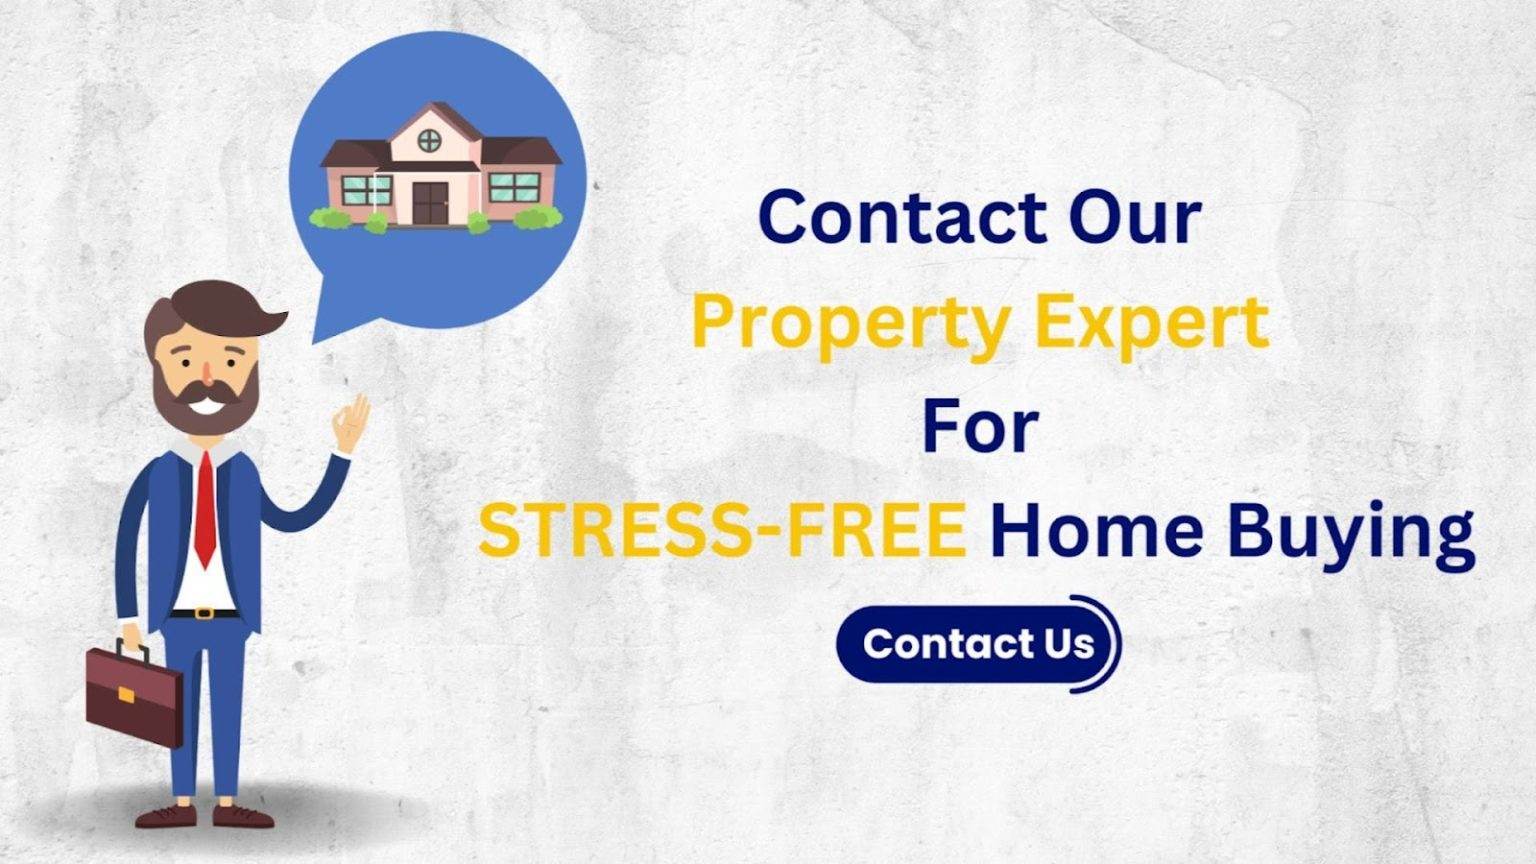 PropertyCloud experts are available for you to find the best guidance related to property and choosing a property.